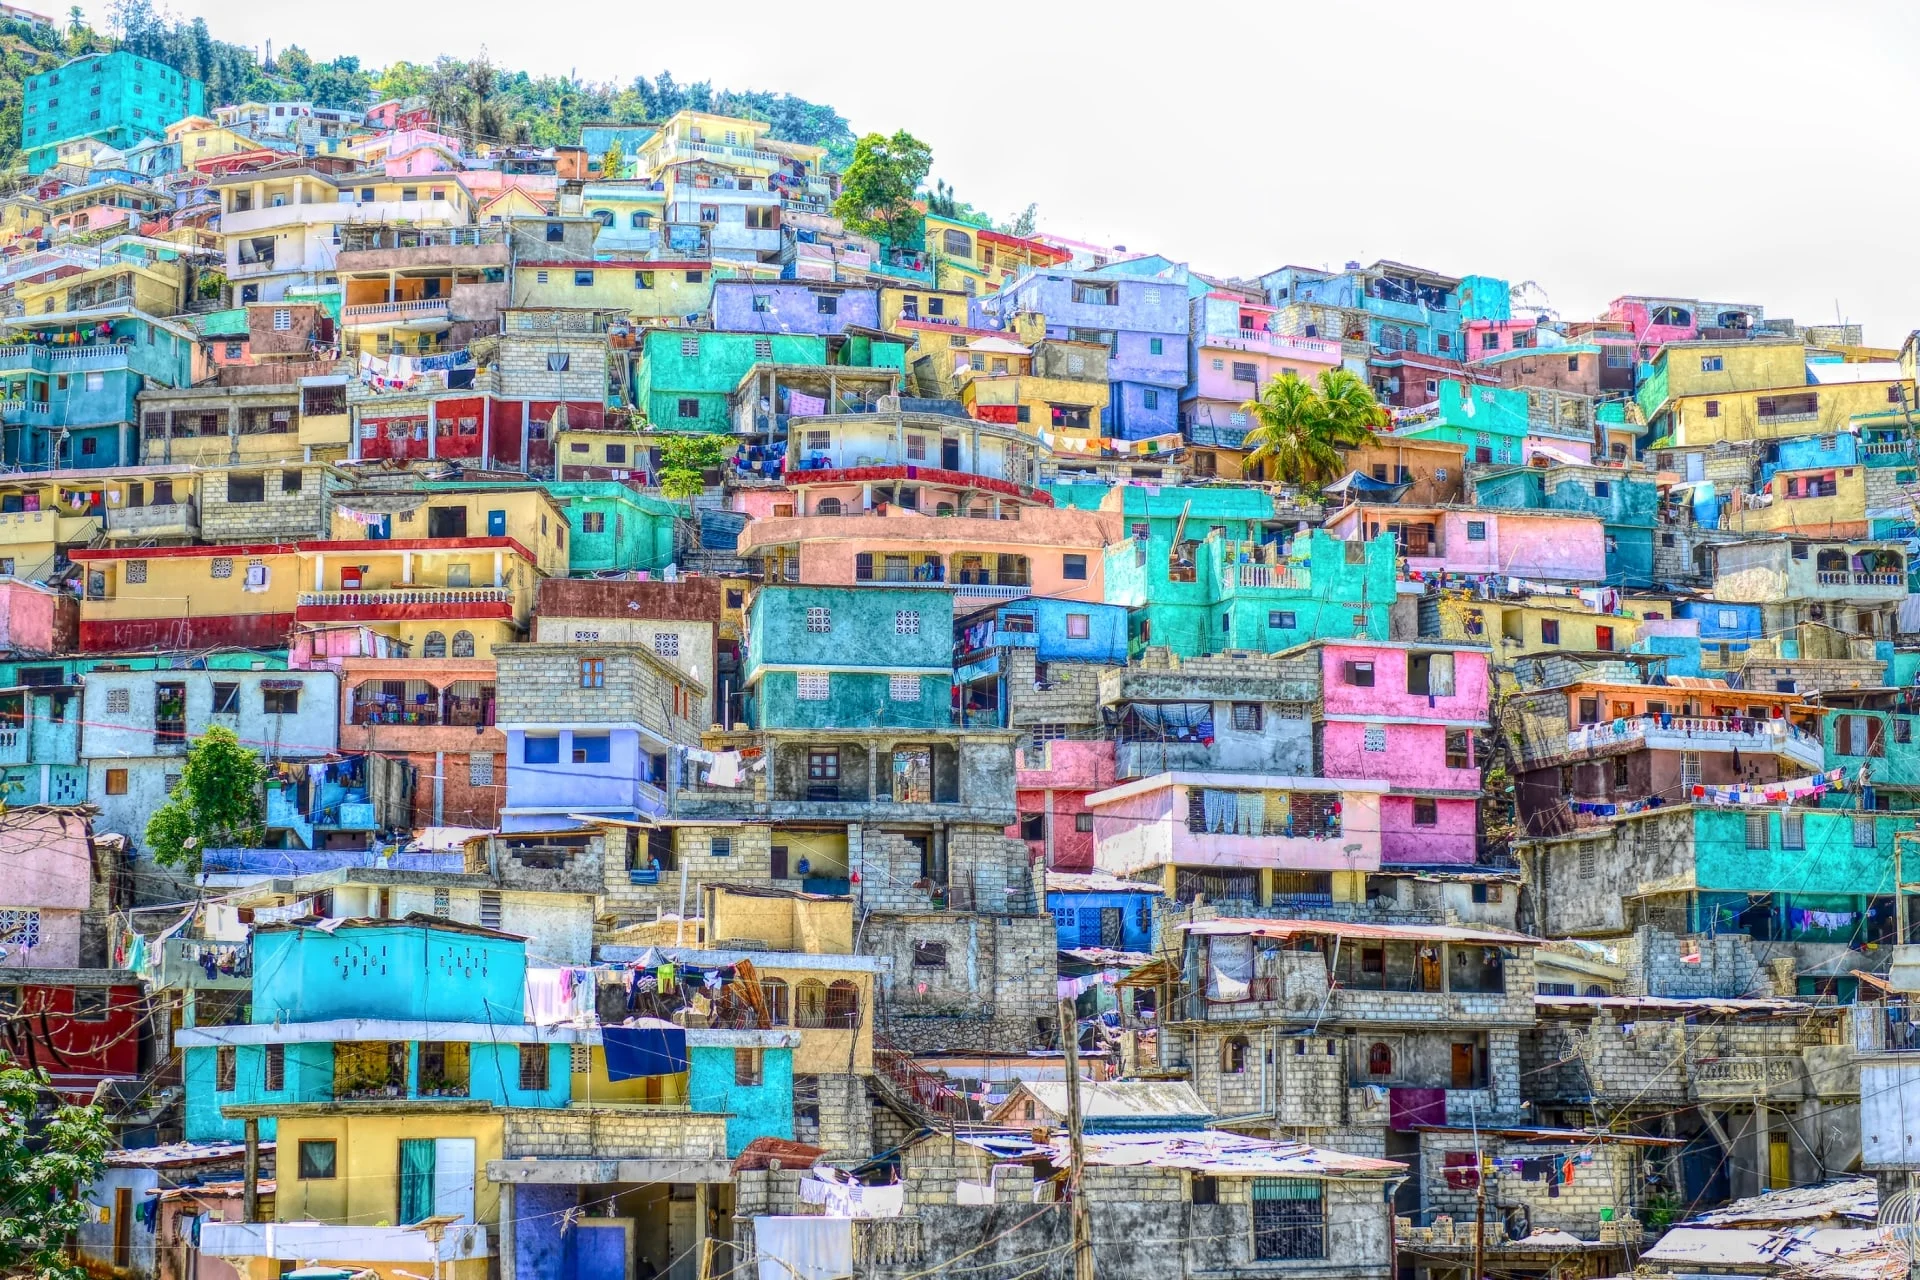 Colorful houses on the side of a hill.